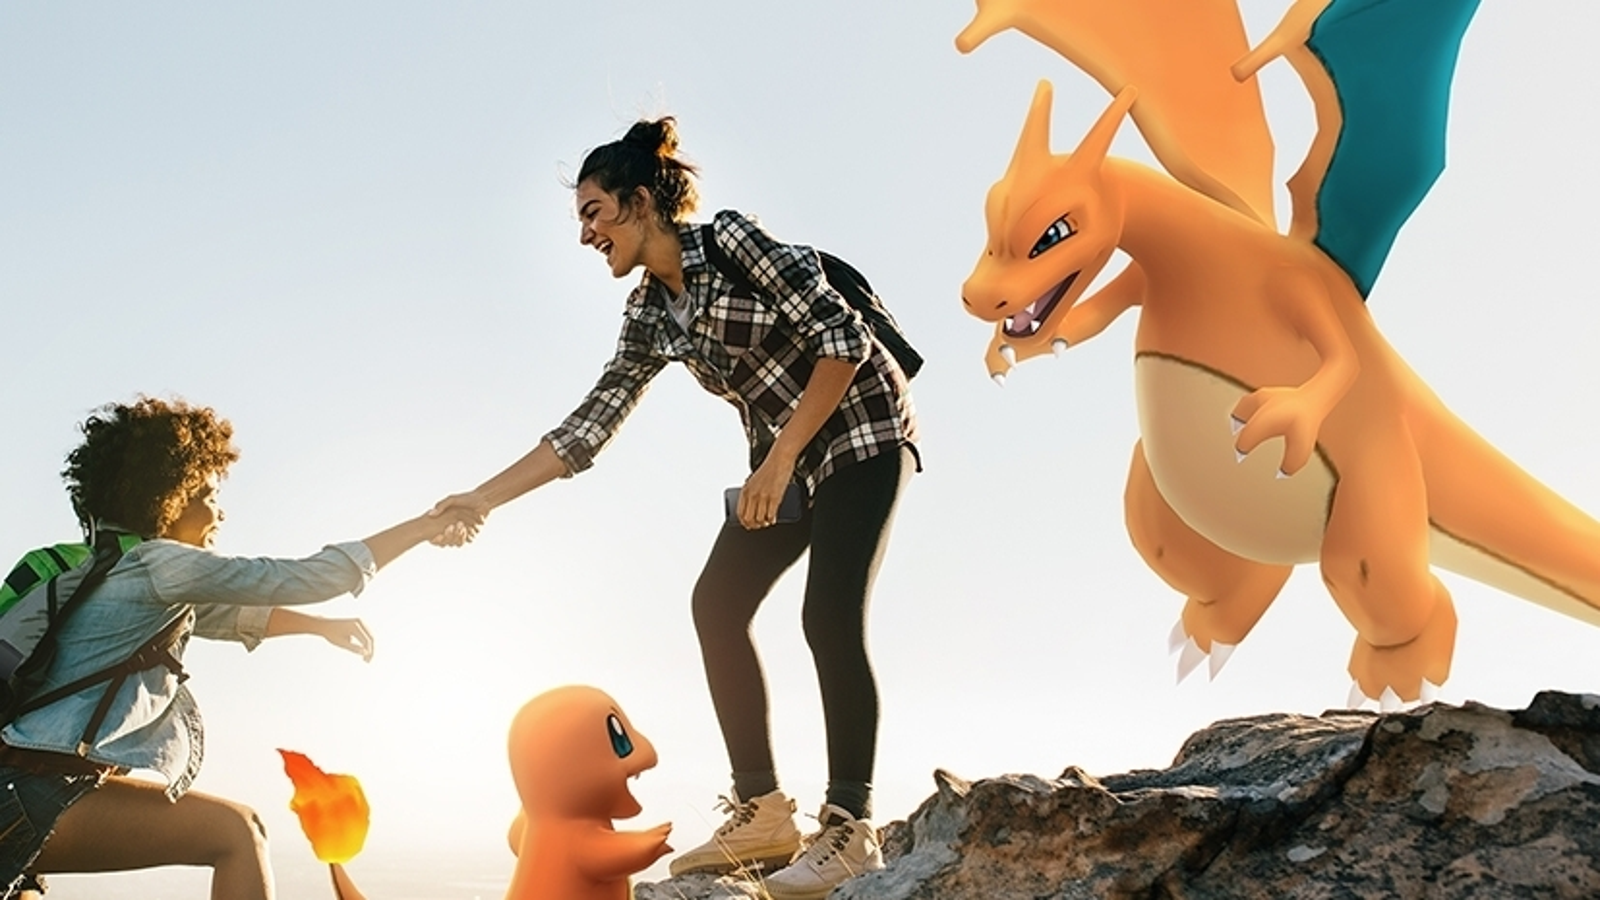 Pokémon Go Trainers will soon be able to level up to 50